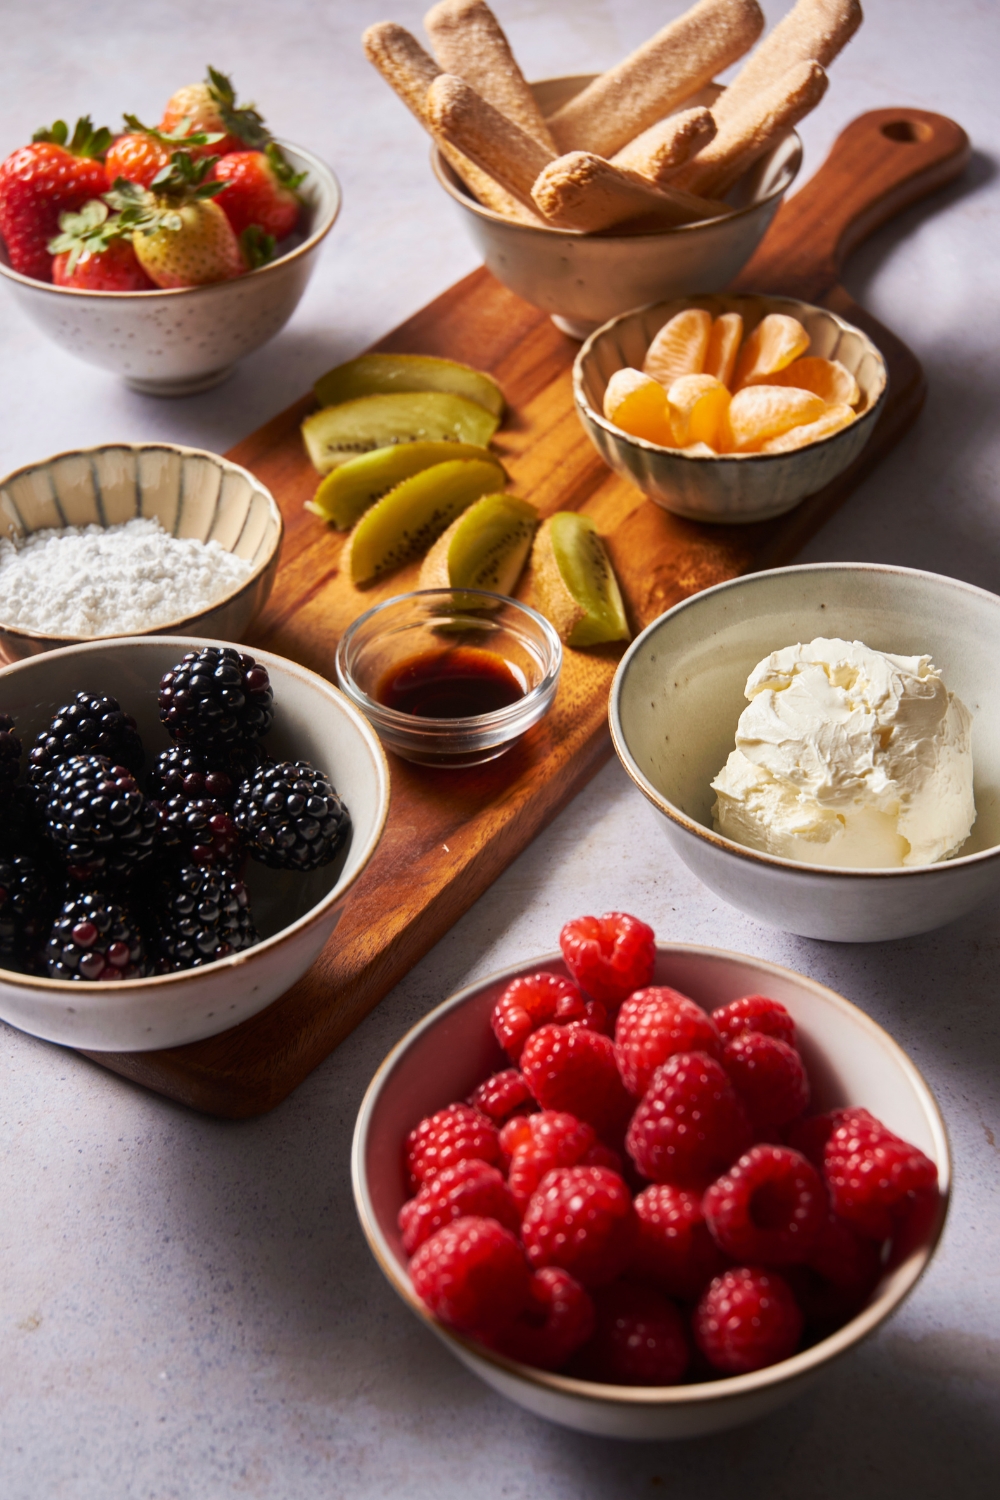 An assortment of ingredients including bowls of fresh raspberries, blackberries, cream cheese, tangerines, powdered sugar, and vanilla extract. Some of the ingredients are on top of a wooden board, others are on the counter.